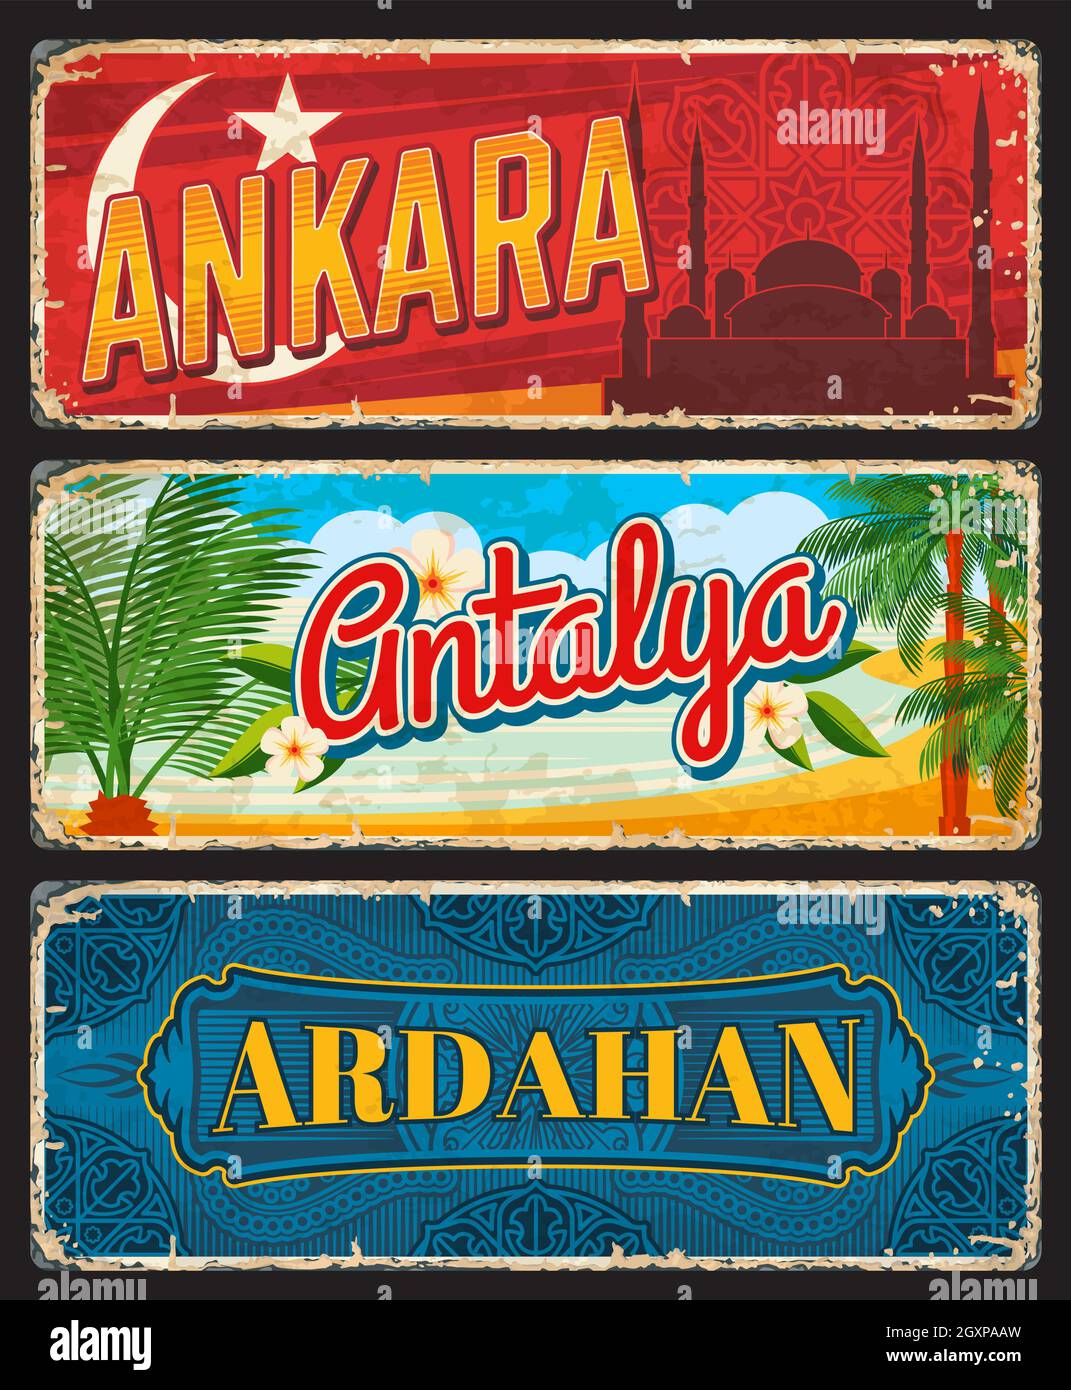 Ankara, Antalya and Ardahan provinces of Turkey, il vintage plates. Vector aged travel destination banners. Retro grunge signboards, antique worn post Stock Vector